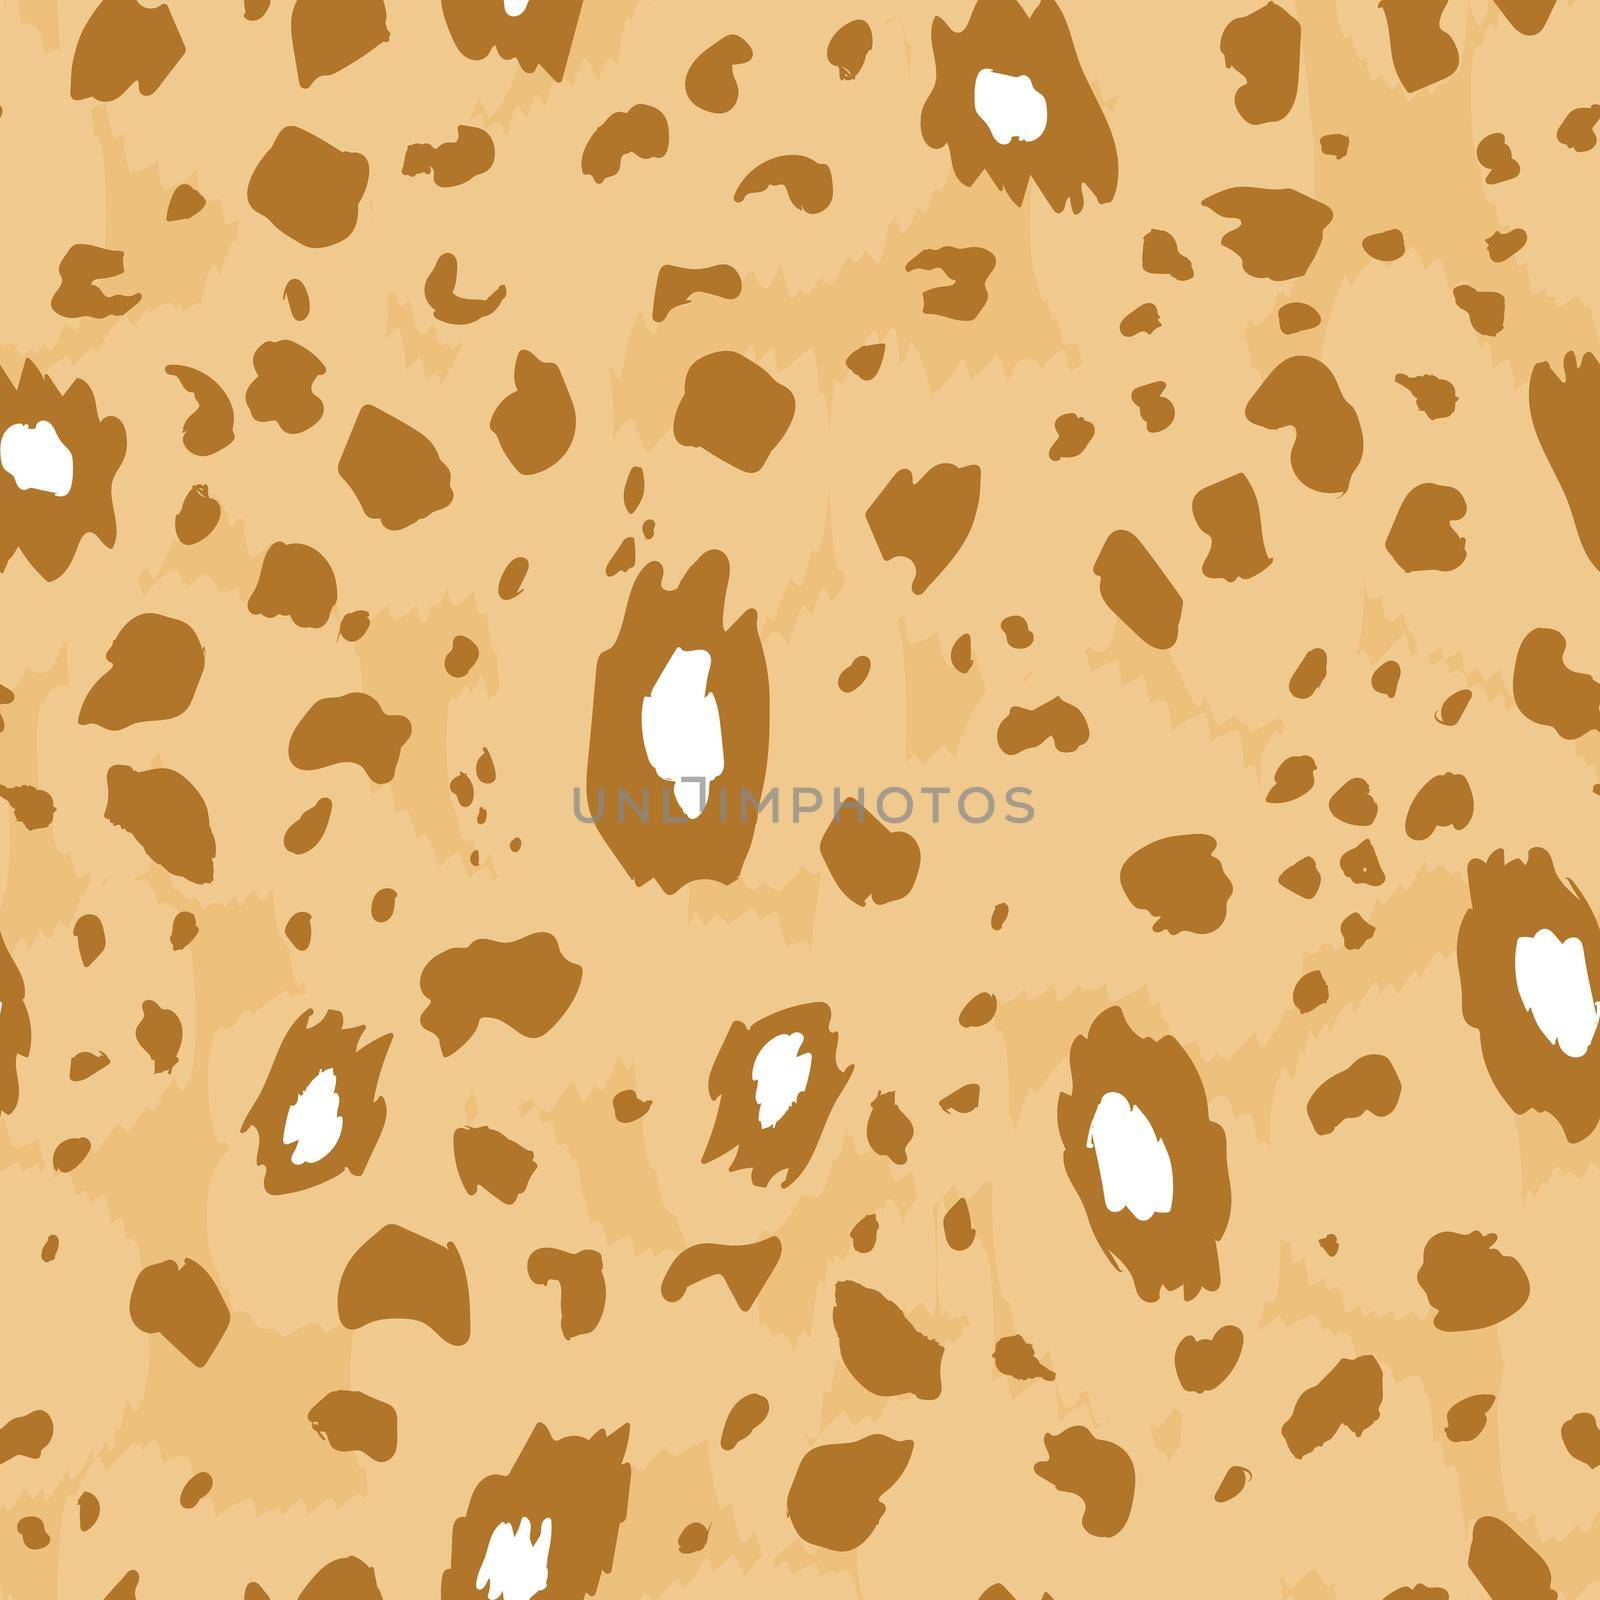 Abstract modern leopard seamless pattern. Animals trendy background. Brown and beige decorative vector stock illustration for print, card, postcard, fabric, textile. Modern ornament of stylized skin.